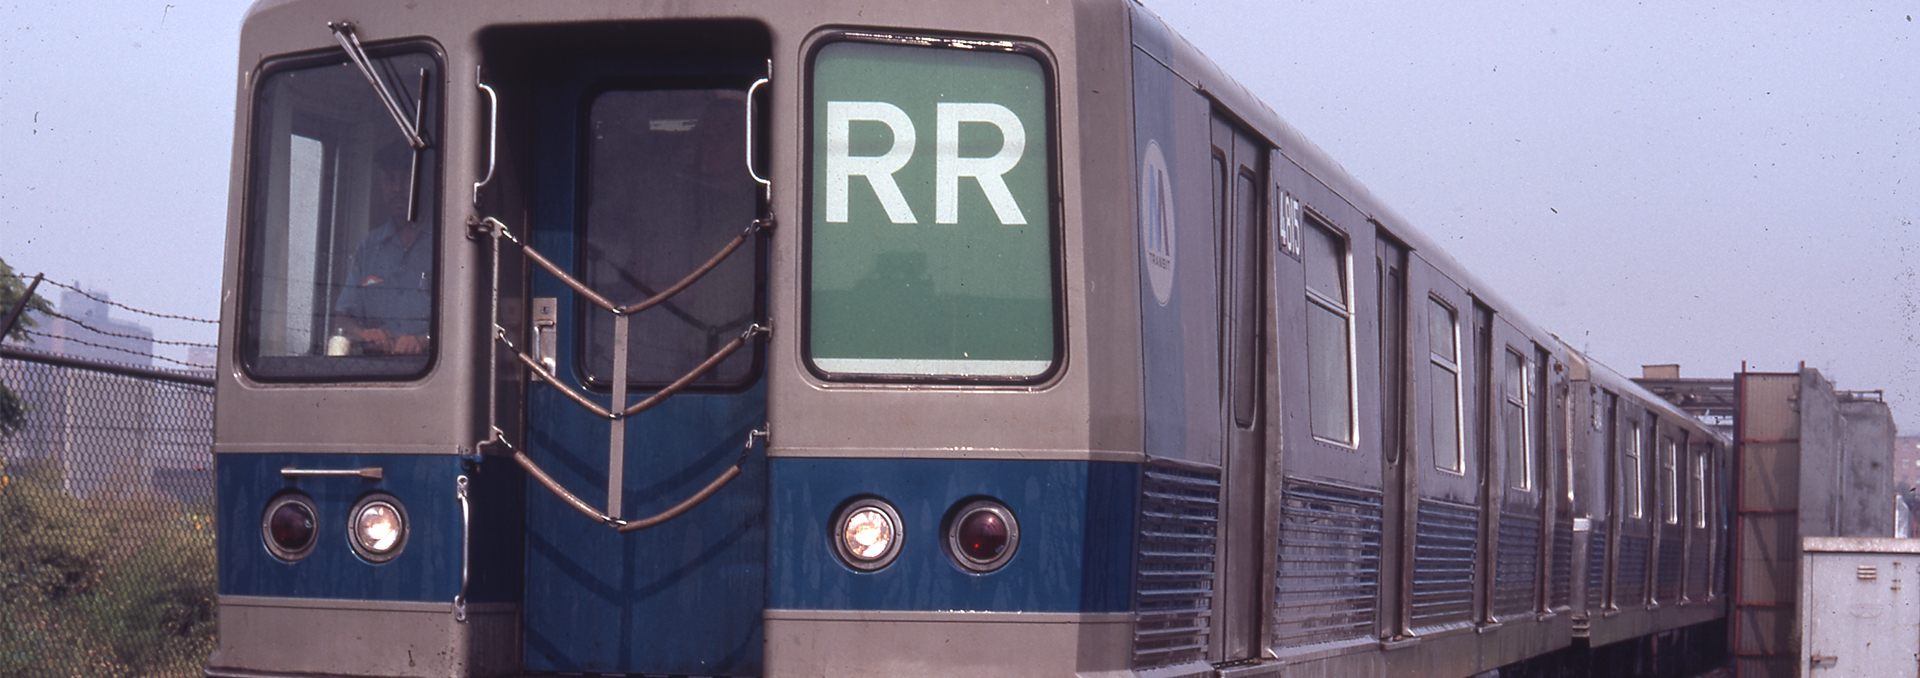 R-42 Subway Car with RR Route Indicator, Photo from the New York Transit Museum Collection